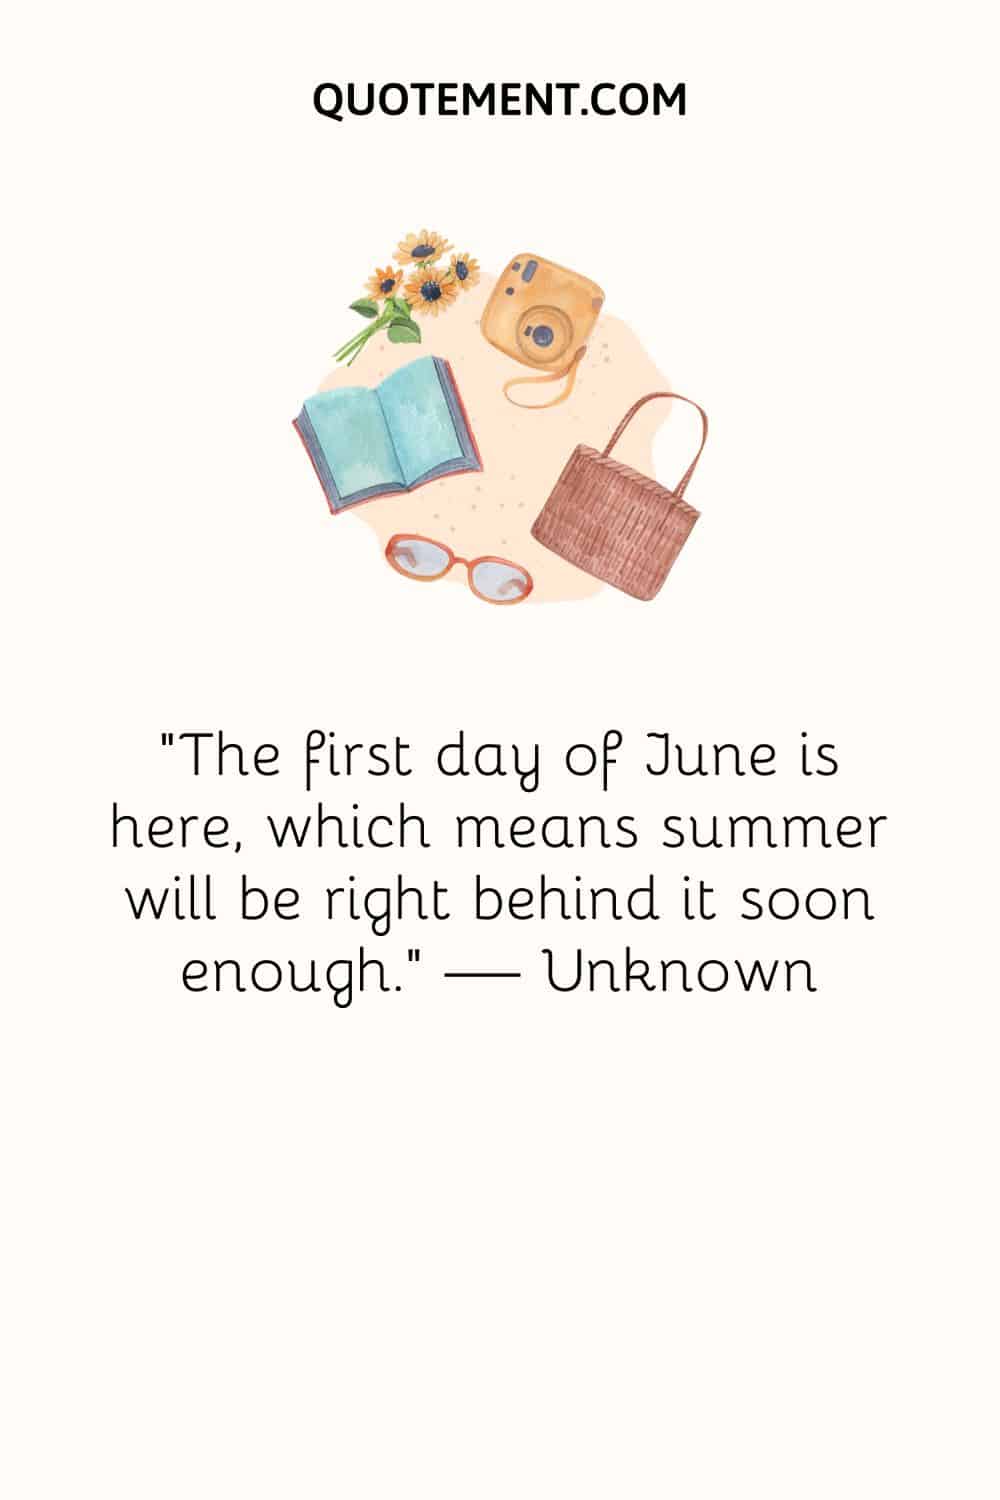 a book, glasses, purse, camera, and flowers image representing positive hello June quote